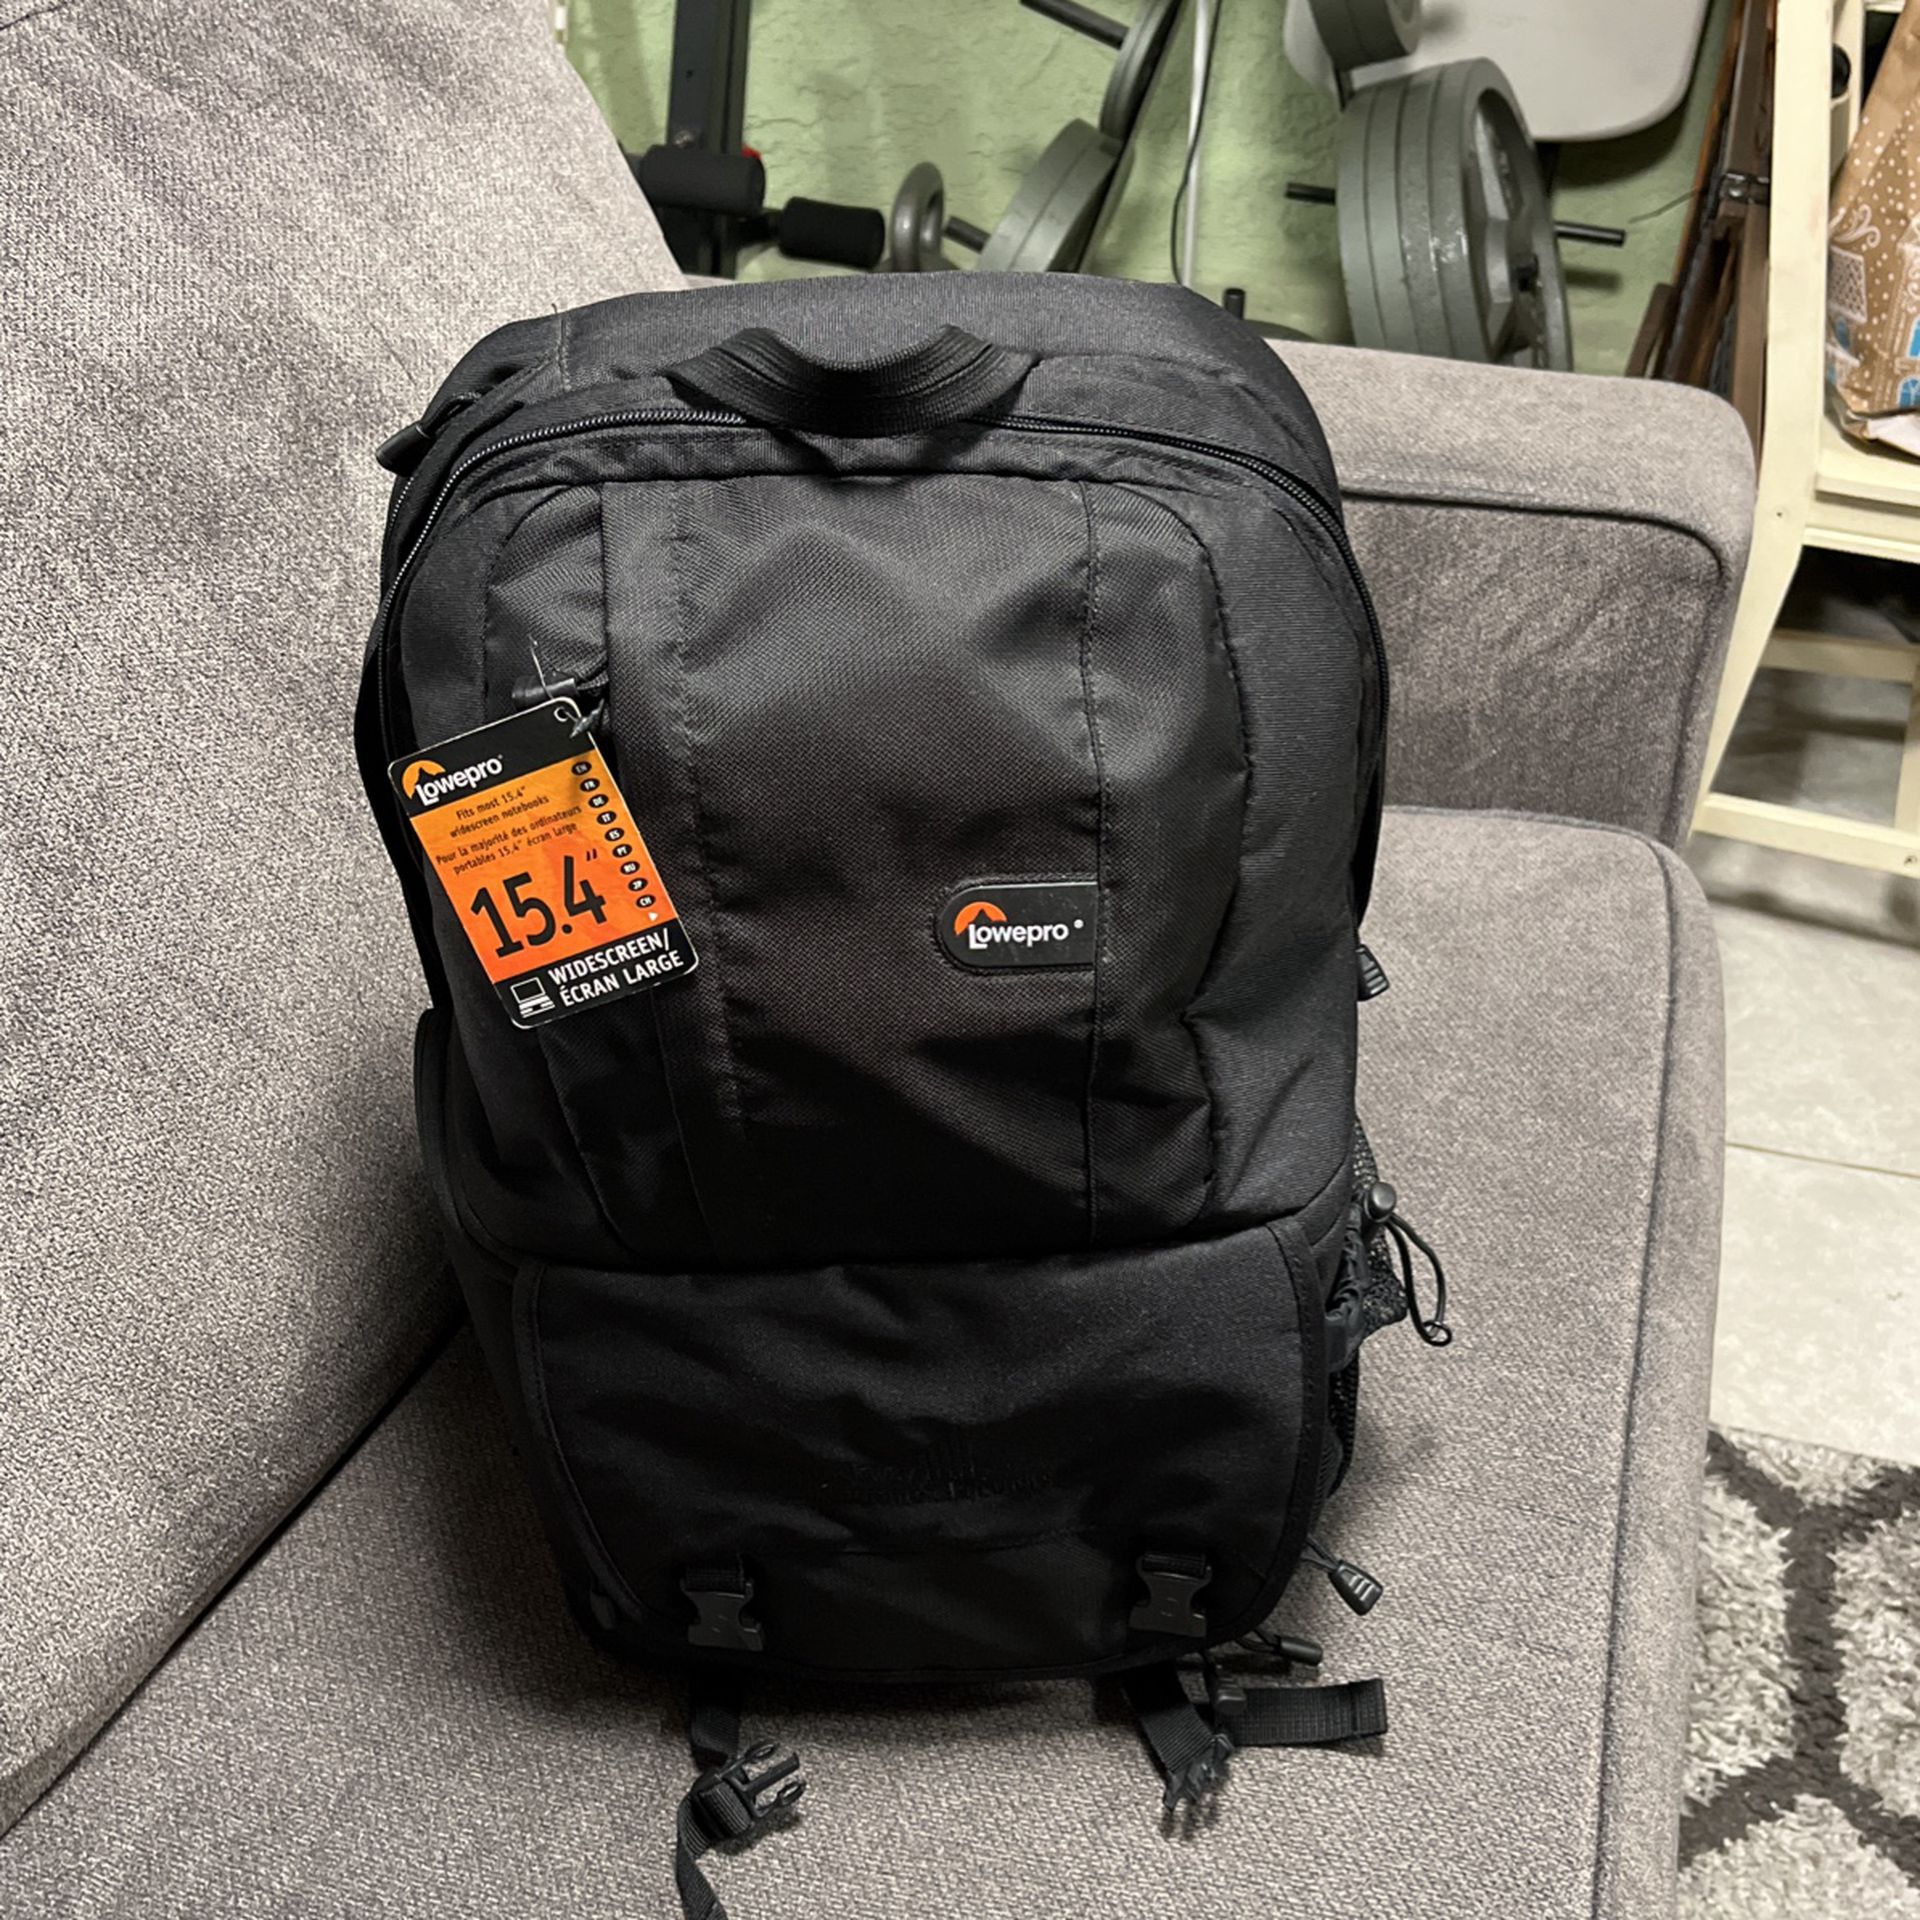 Lowepro Camera Bag Fits 15.4 Inches Notebooks And Full Frame Camera